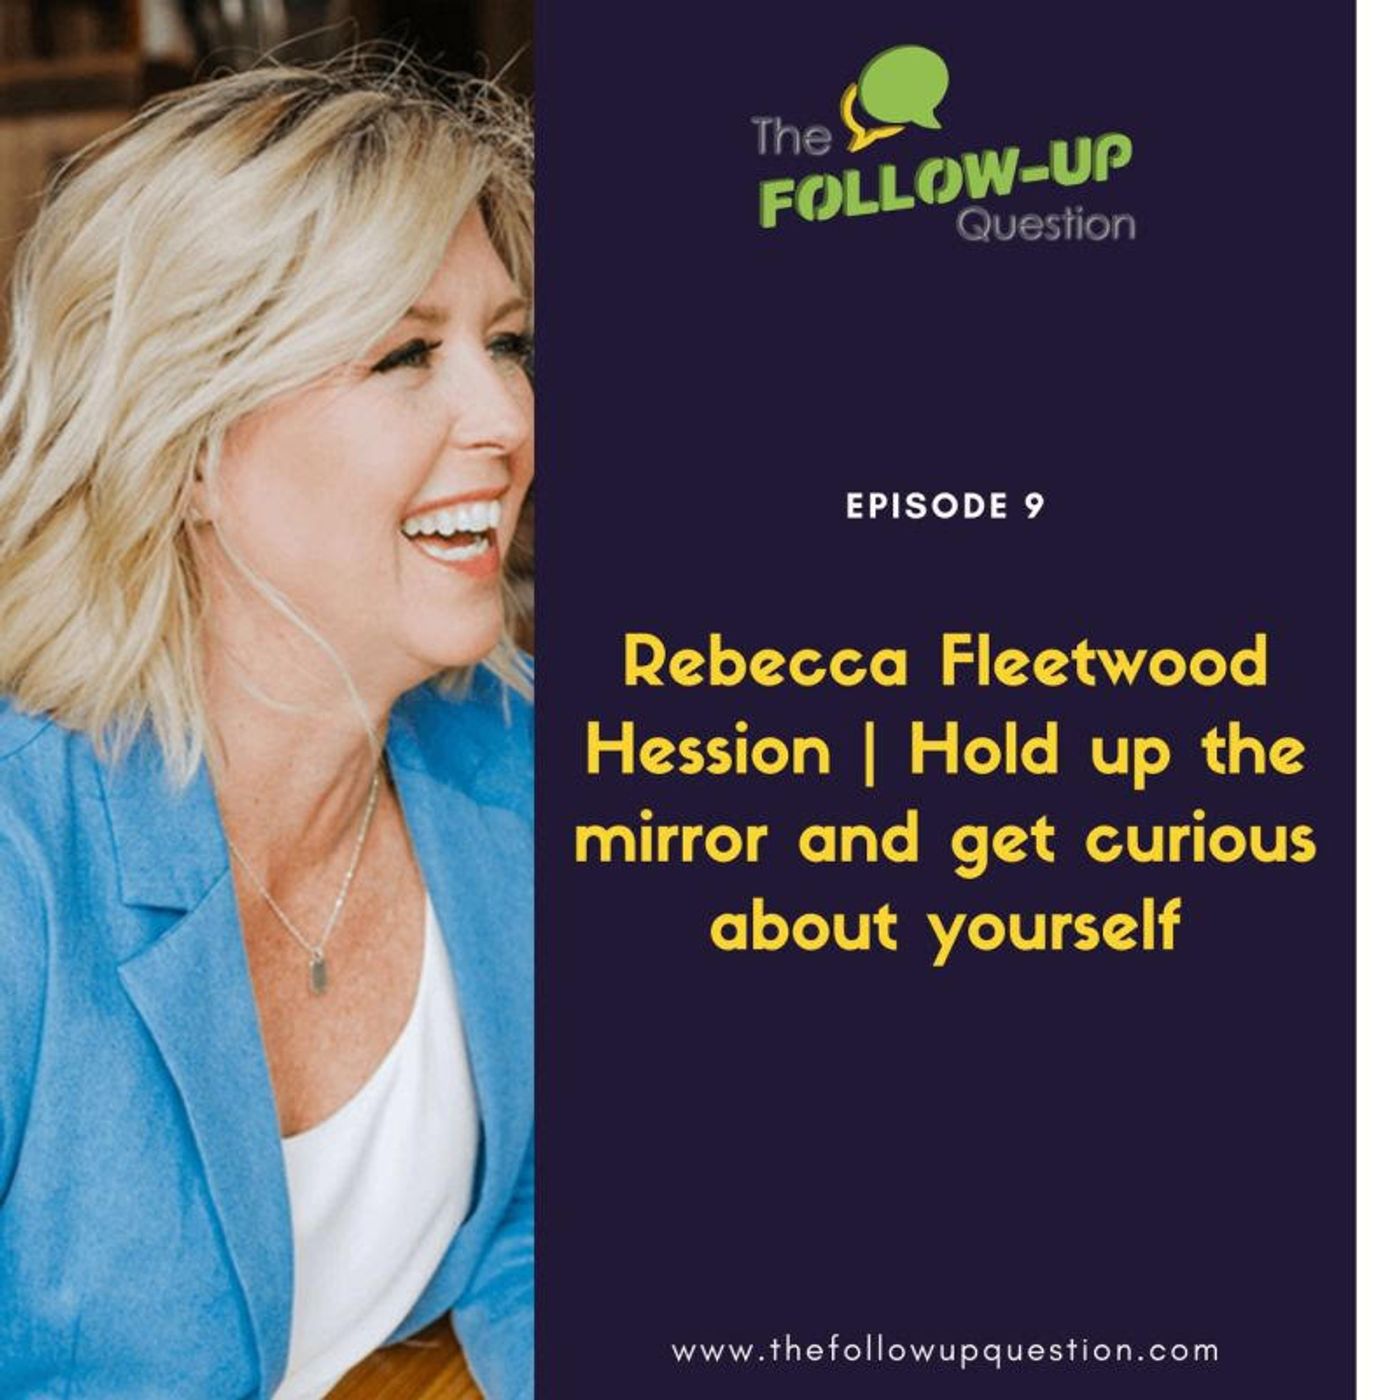 "The Follow-Up Question" Podcast Featuring Rebecca Fleetwood Hession